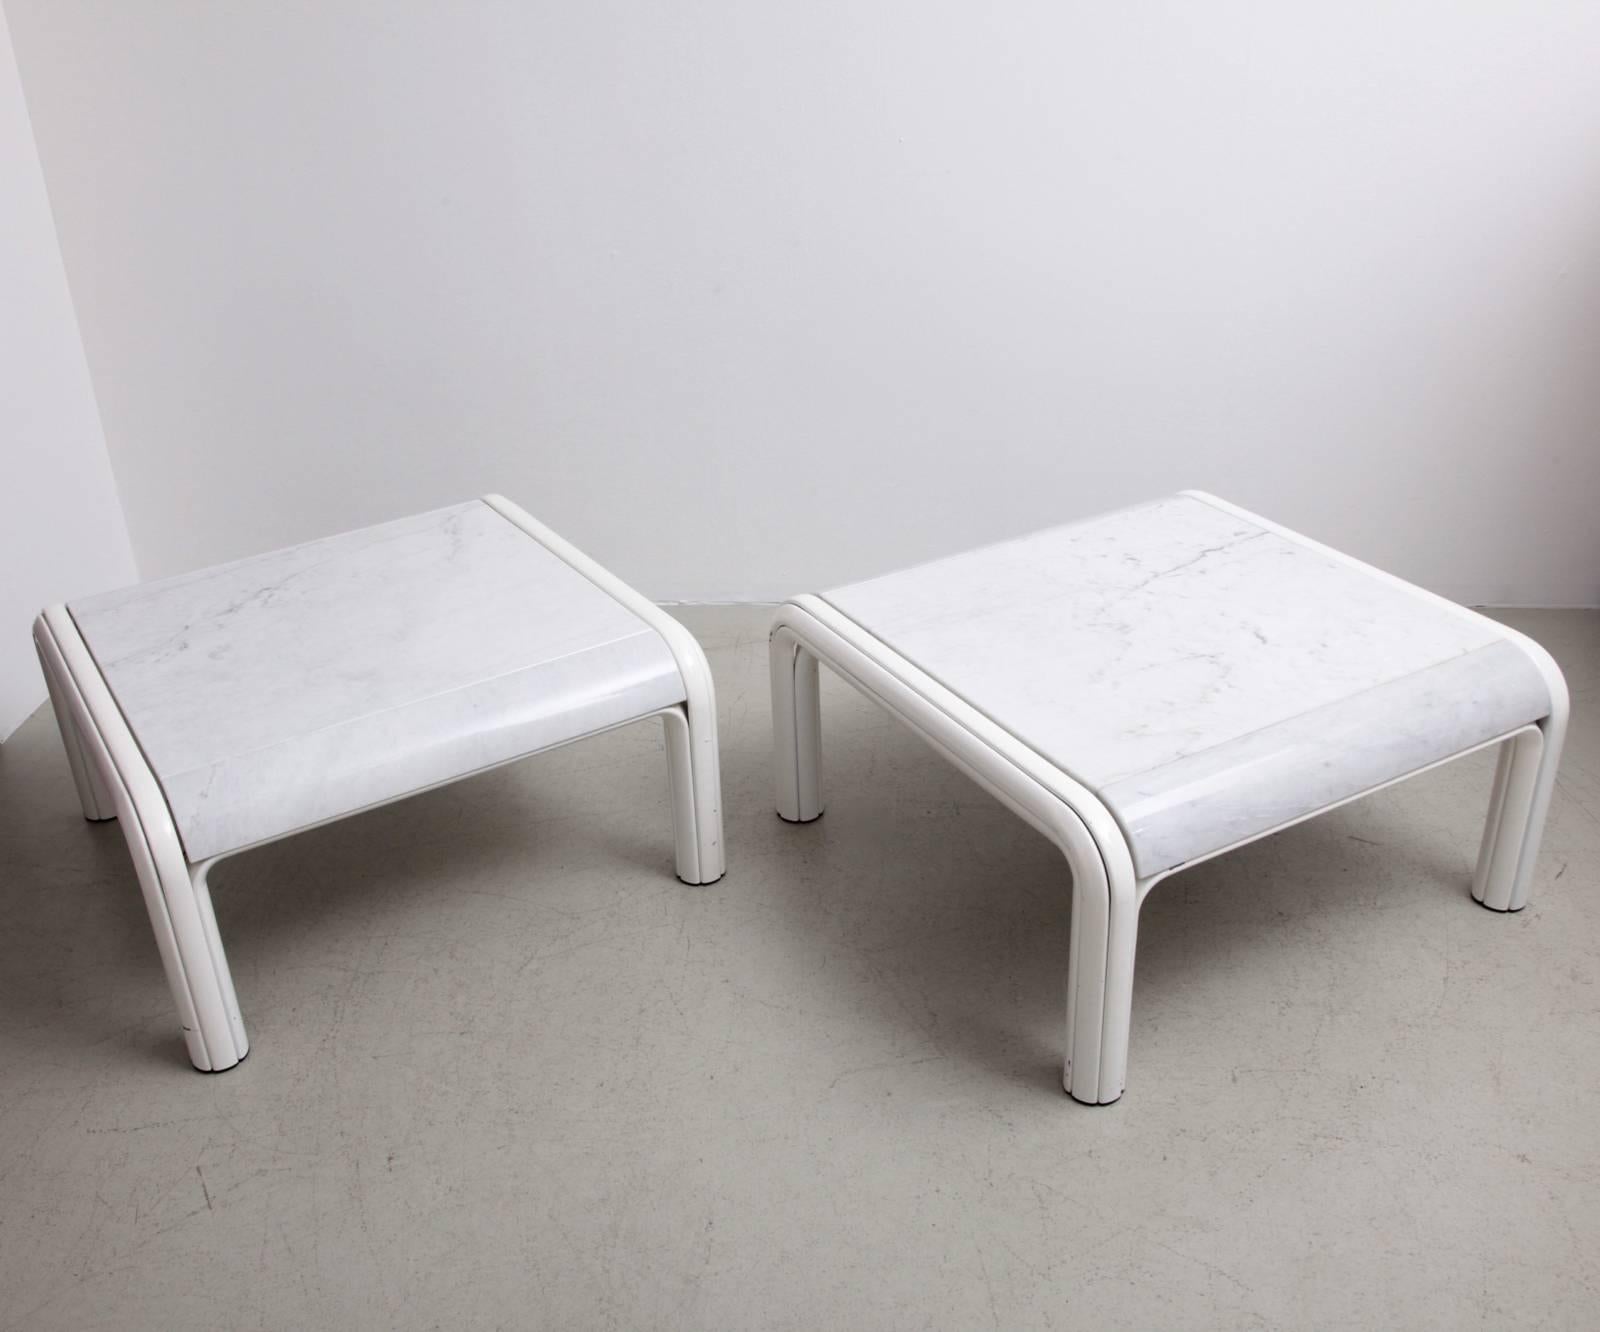 Mid-Century Modern Rare Pair of Marble Coffee or Sofa Tables by Gae Aulenti for Knoll, Italy, 1970s For Sale